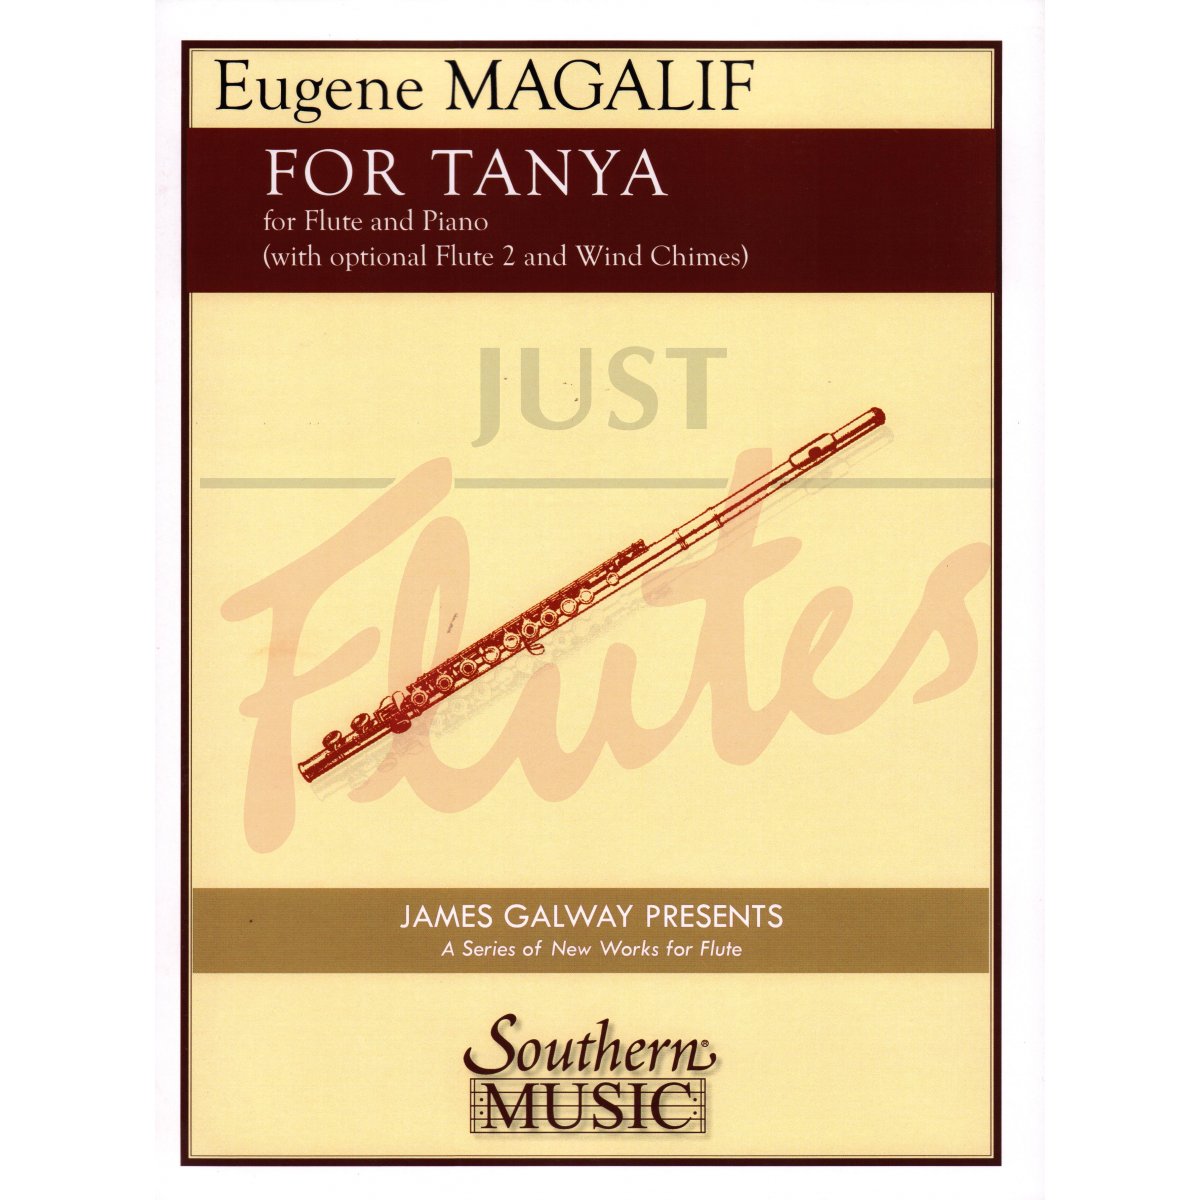 For Tanya for Flute and Piano (with optional Flute 2 and Wind Chimes)